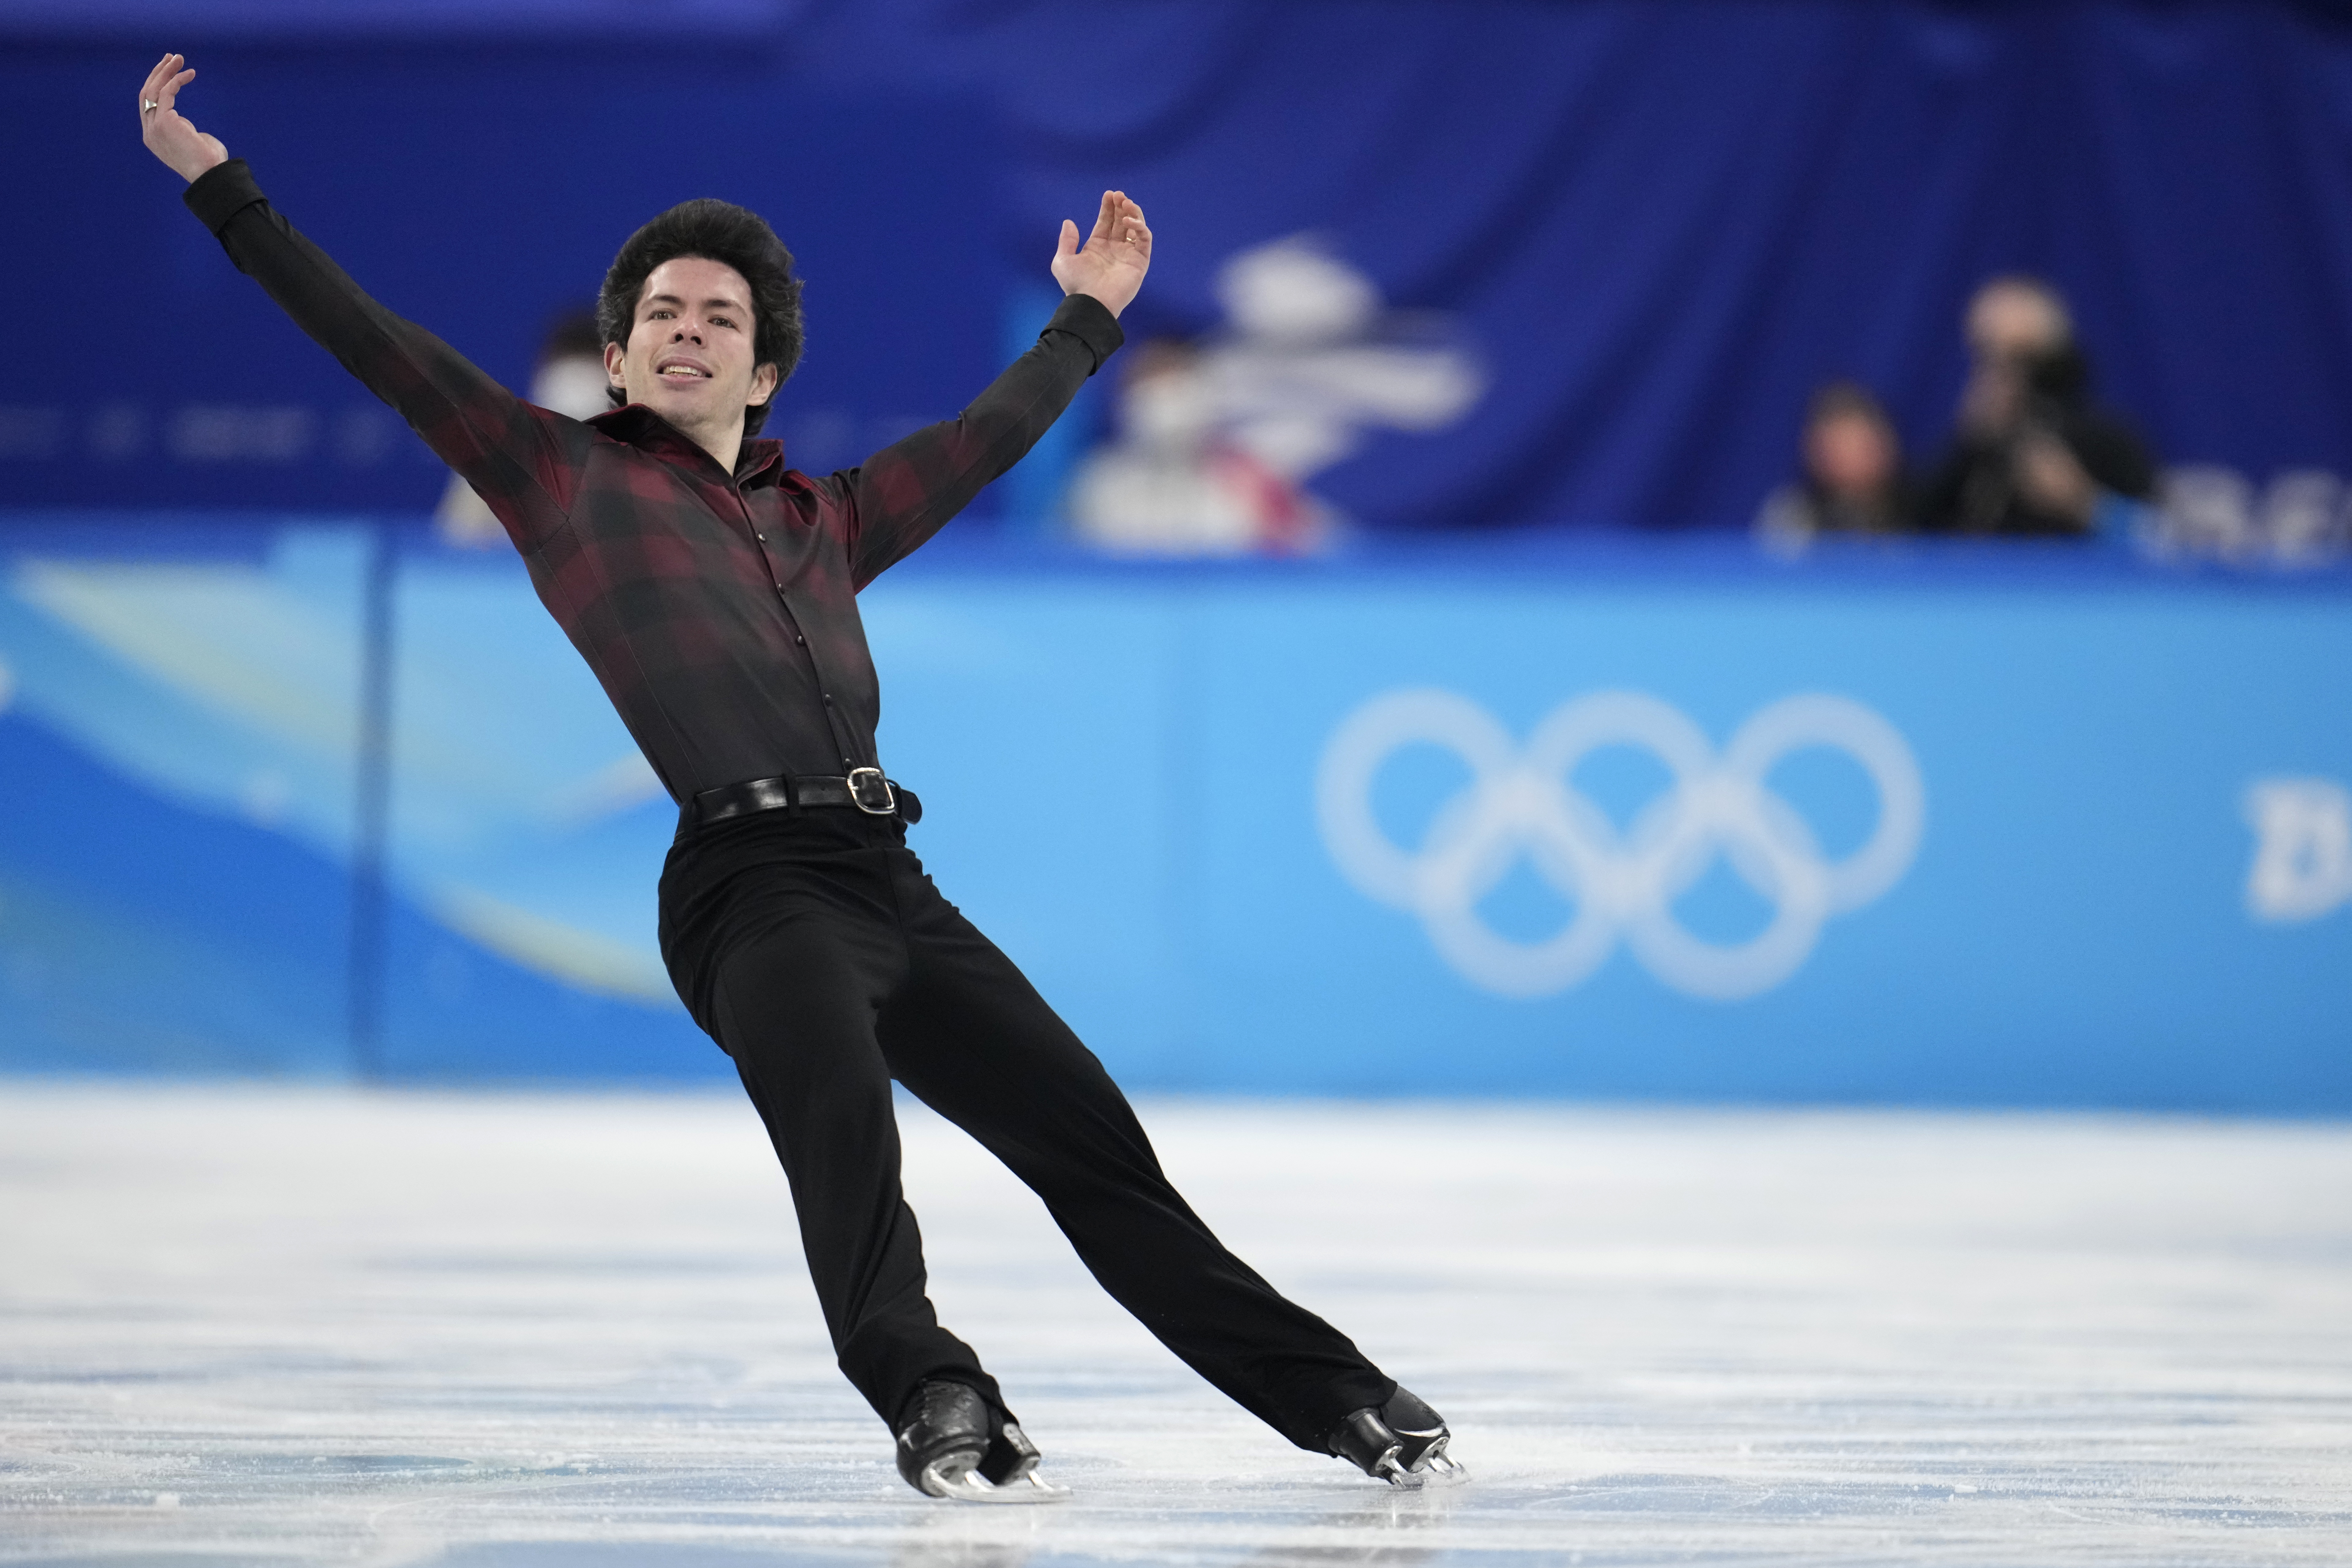 Anchorage figure skater Keegan Messing will skate one more time in the Beijing Olympics